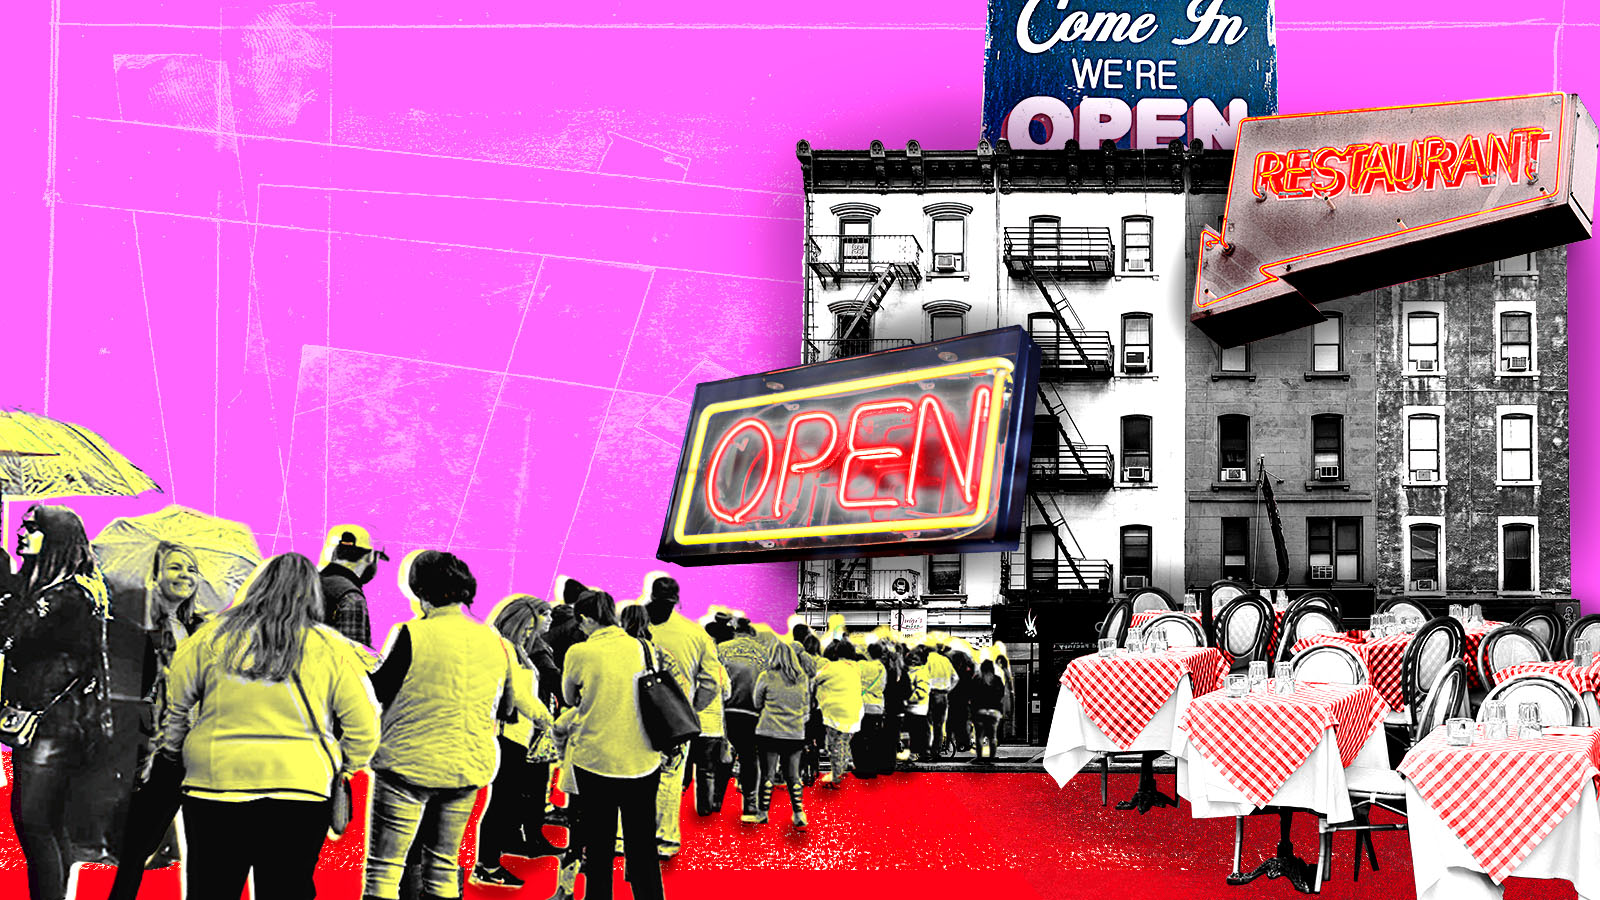 Photo-collage of a line of people standing outside a restaurant with a flashing “open” and “come in we’re open” signage.